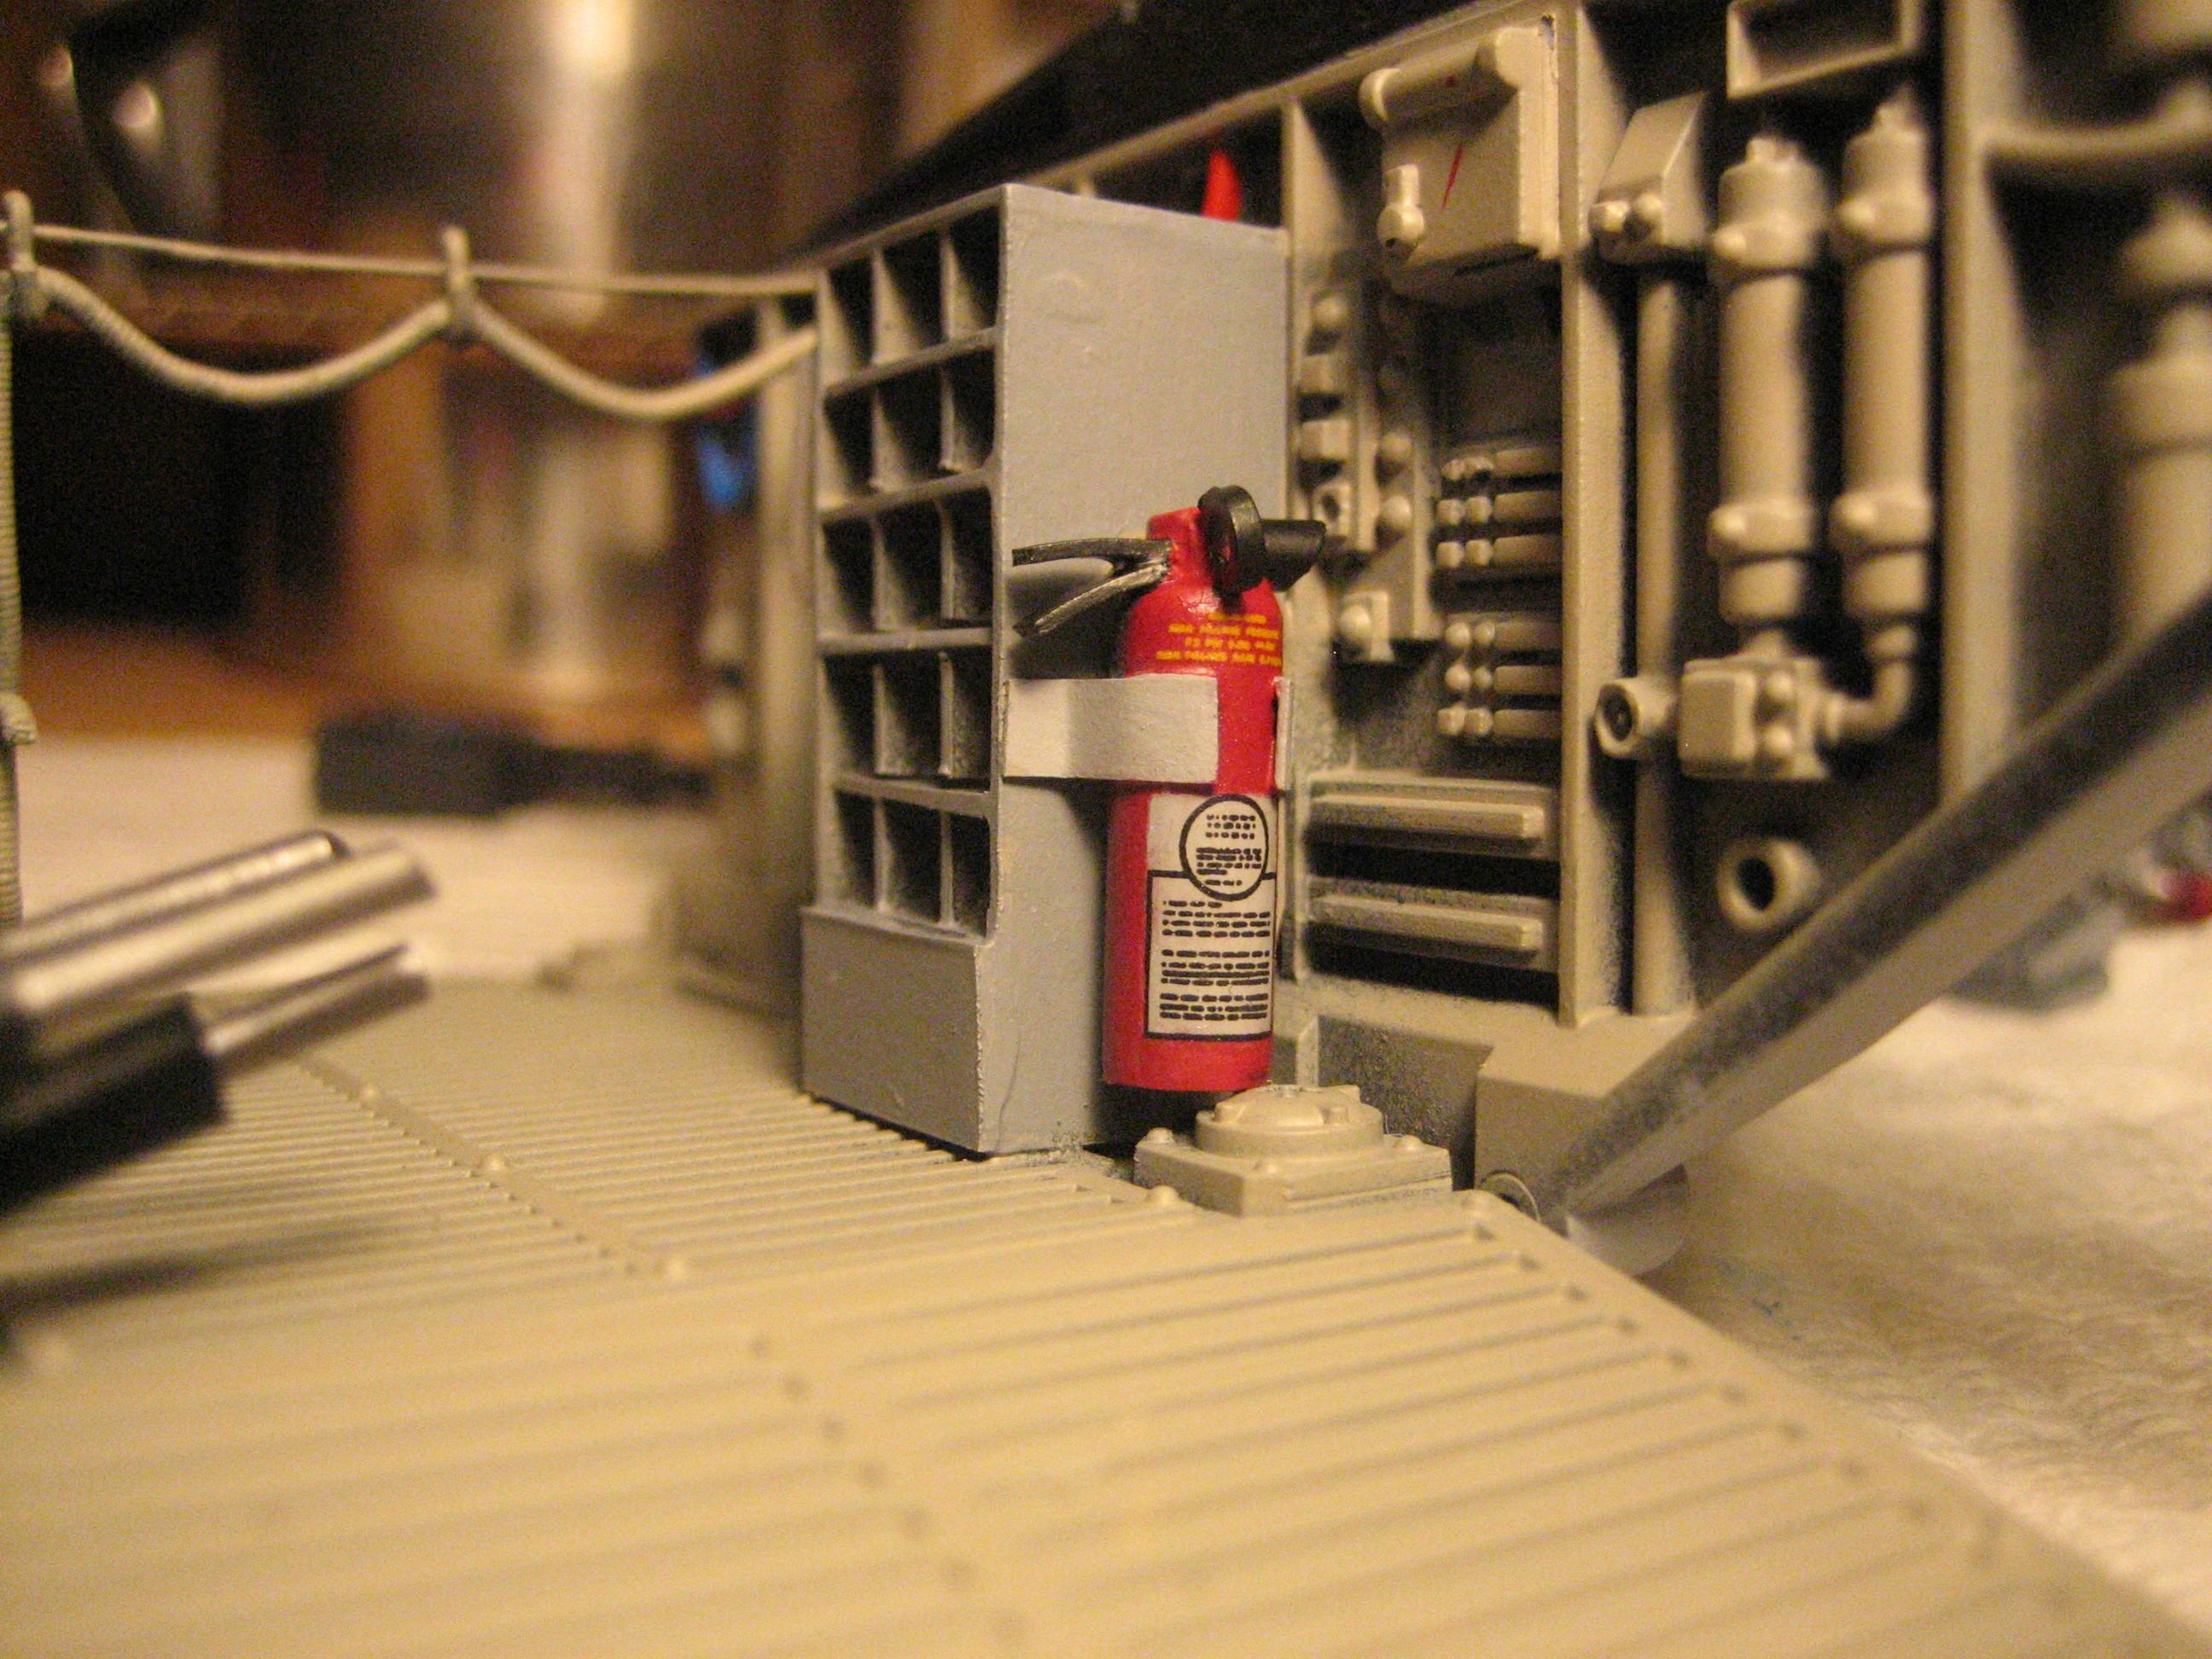 Extinguisher, Fire, Well Made, Work In Progress